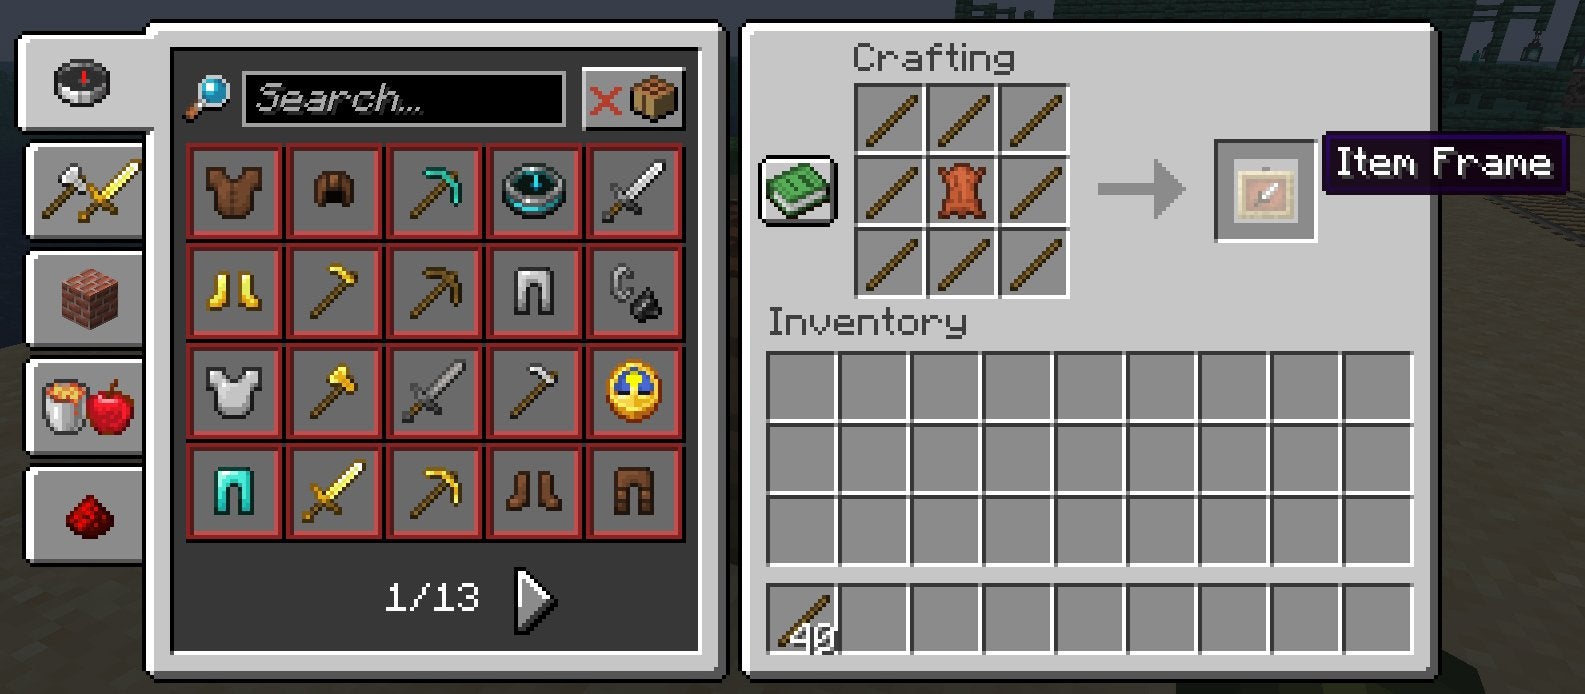 The crafting recipe for the Item Frame in Minecraft.